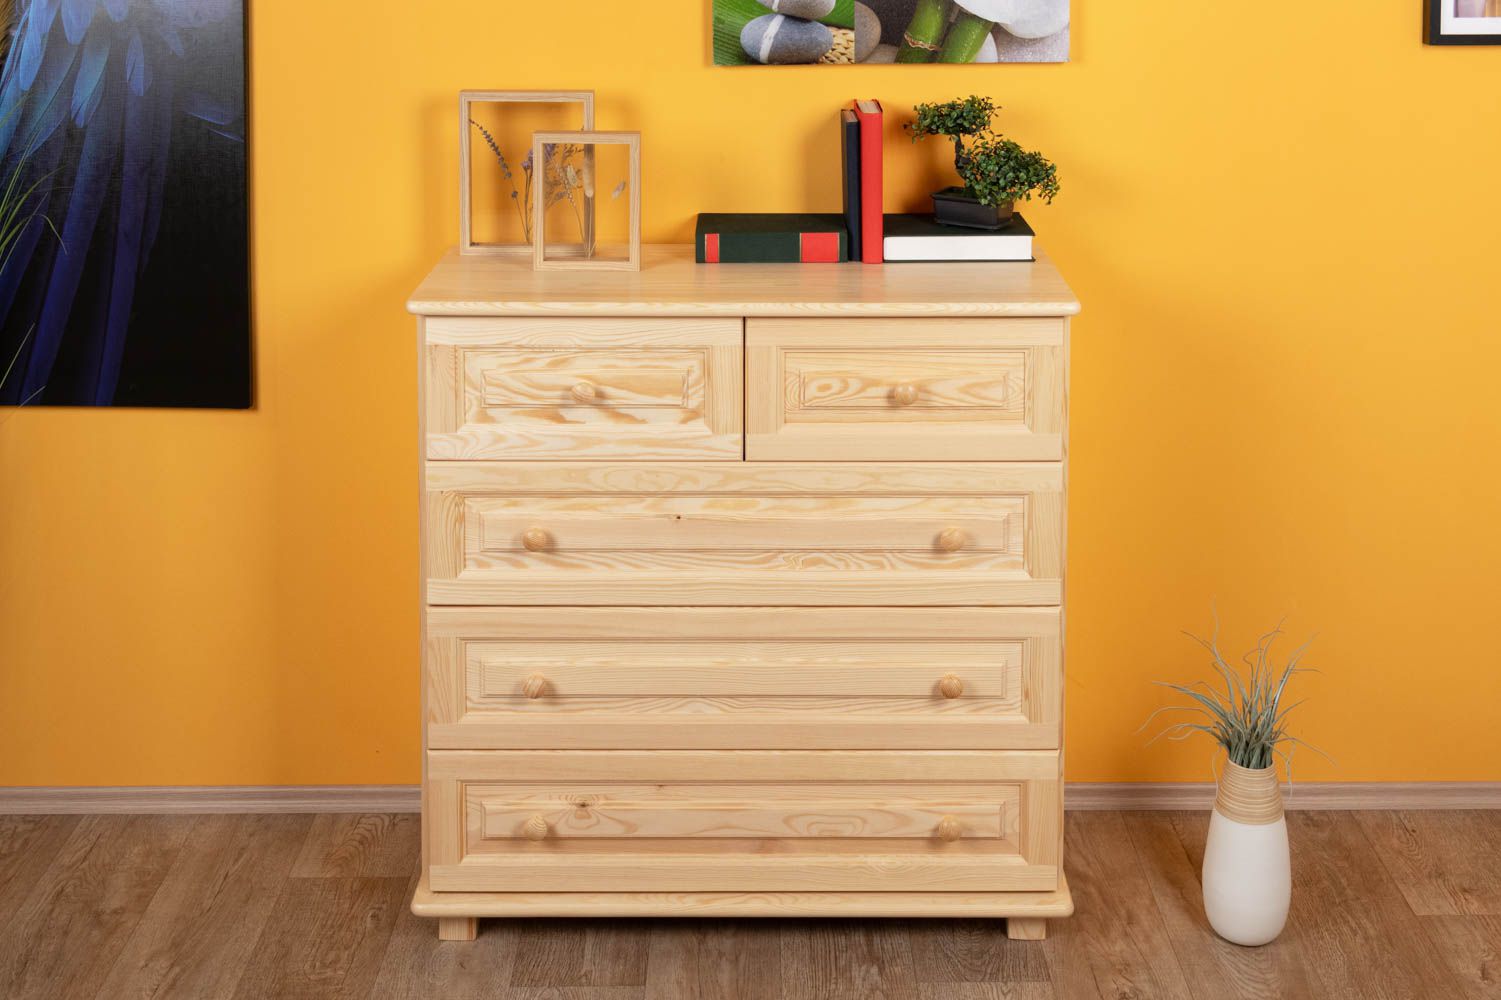 Chest of drawers solid pine solid wood natural 013 - Dimensions 100 x 100 x 42 cm (H x W x D)